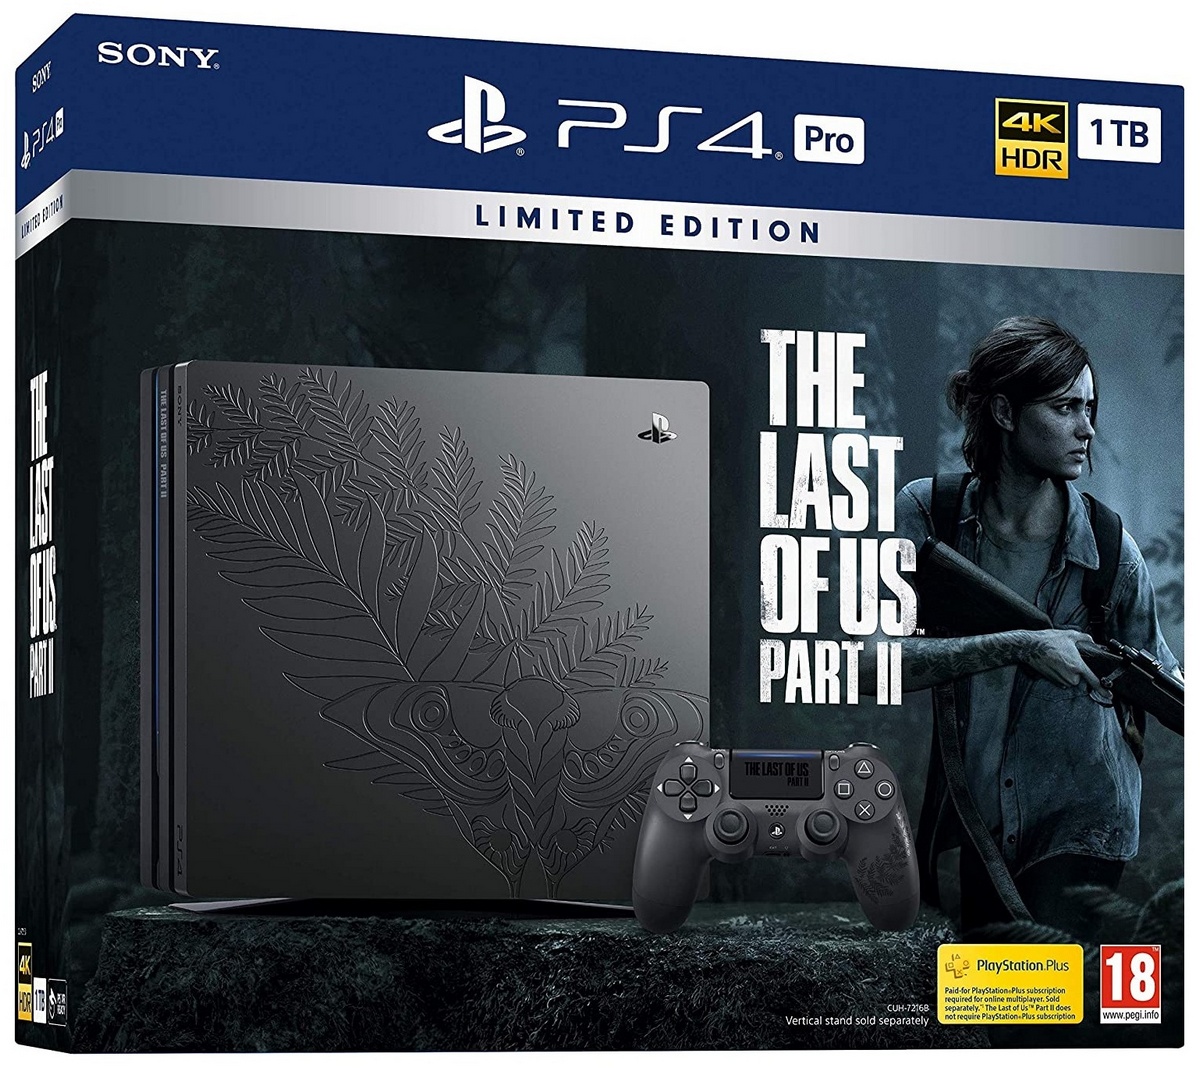 PlayStation 4 Pro 1 TB - Last of Us Part II (2) Limited Edition